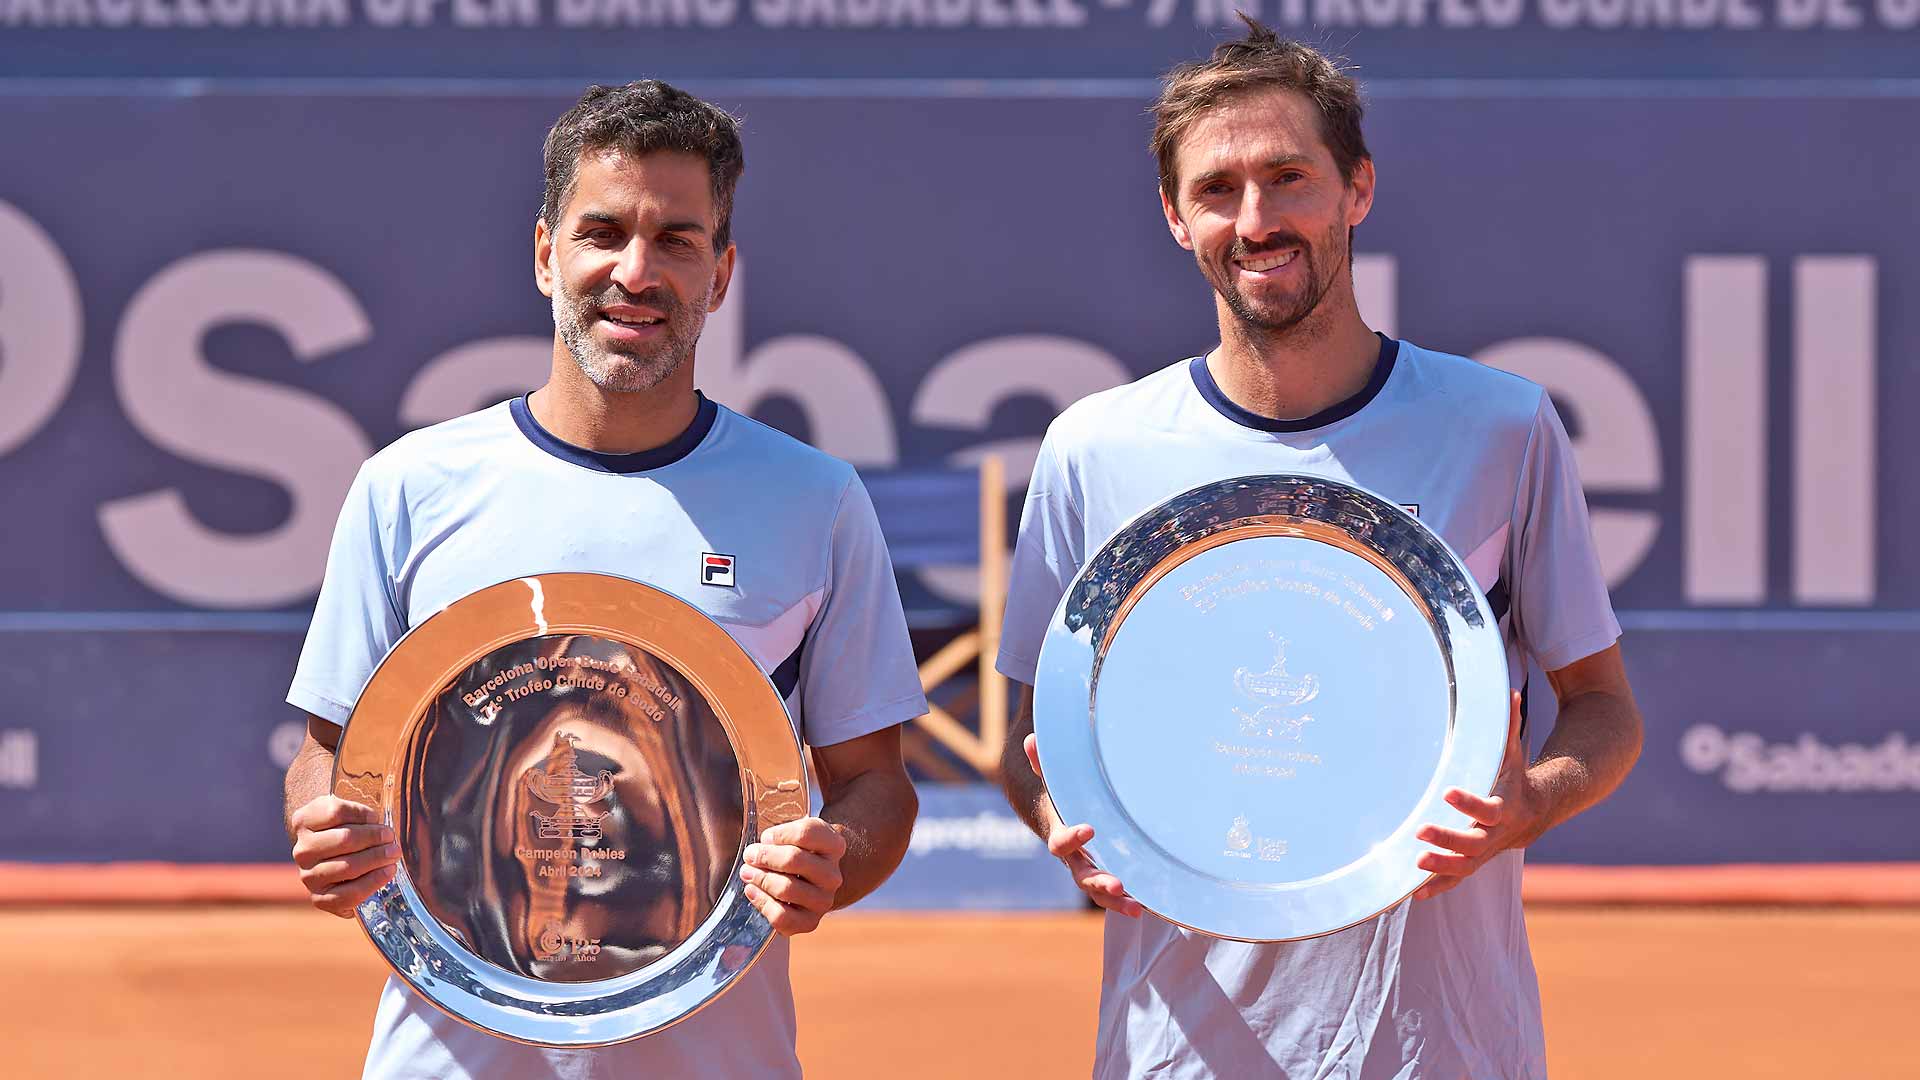 Maximo Gonzalez and Andres Molteni celebrate their second title of the season Sunday in Barcelona.